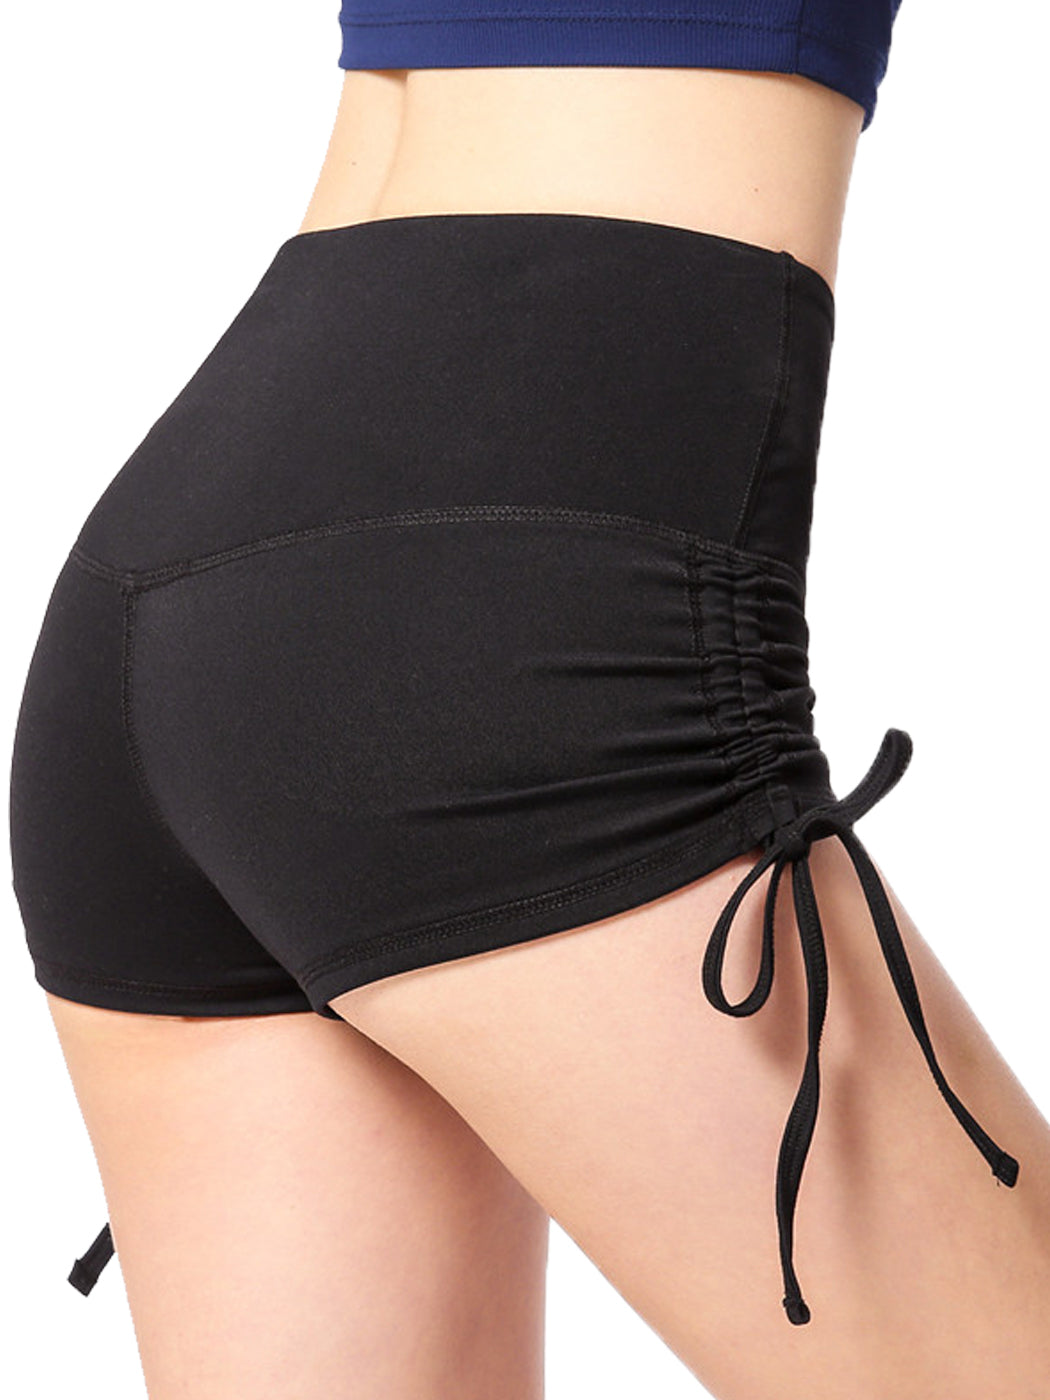 Workout Running Shorts Butt Lifting Athletic Booty Short Pants